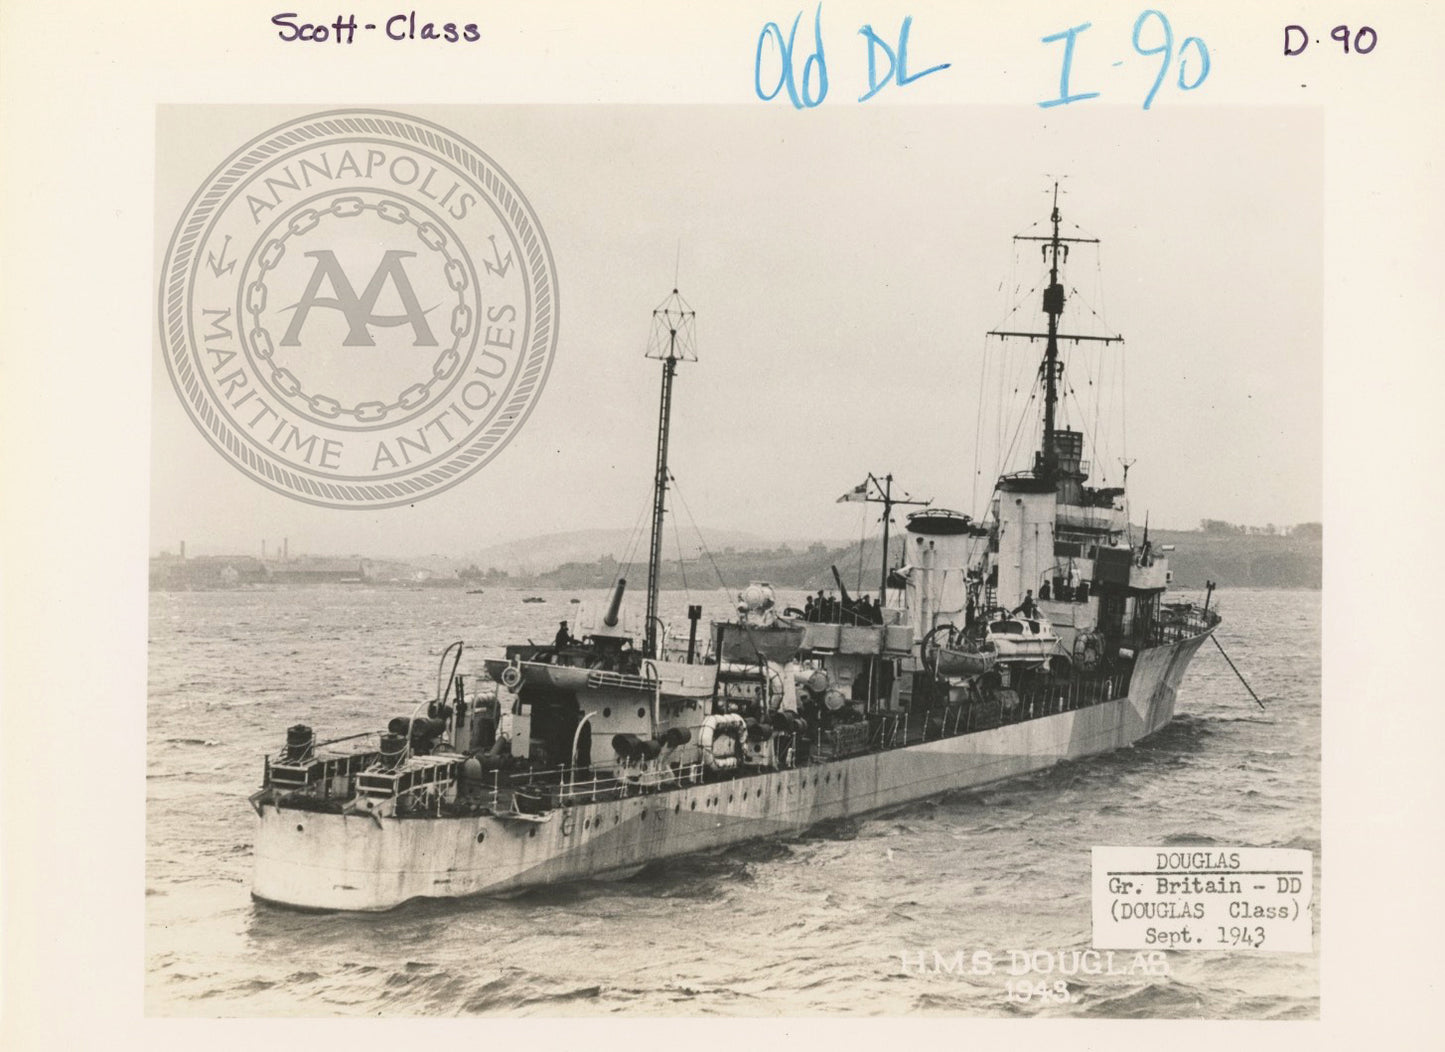 British and Canadian "Scott" Class Destroyers